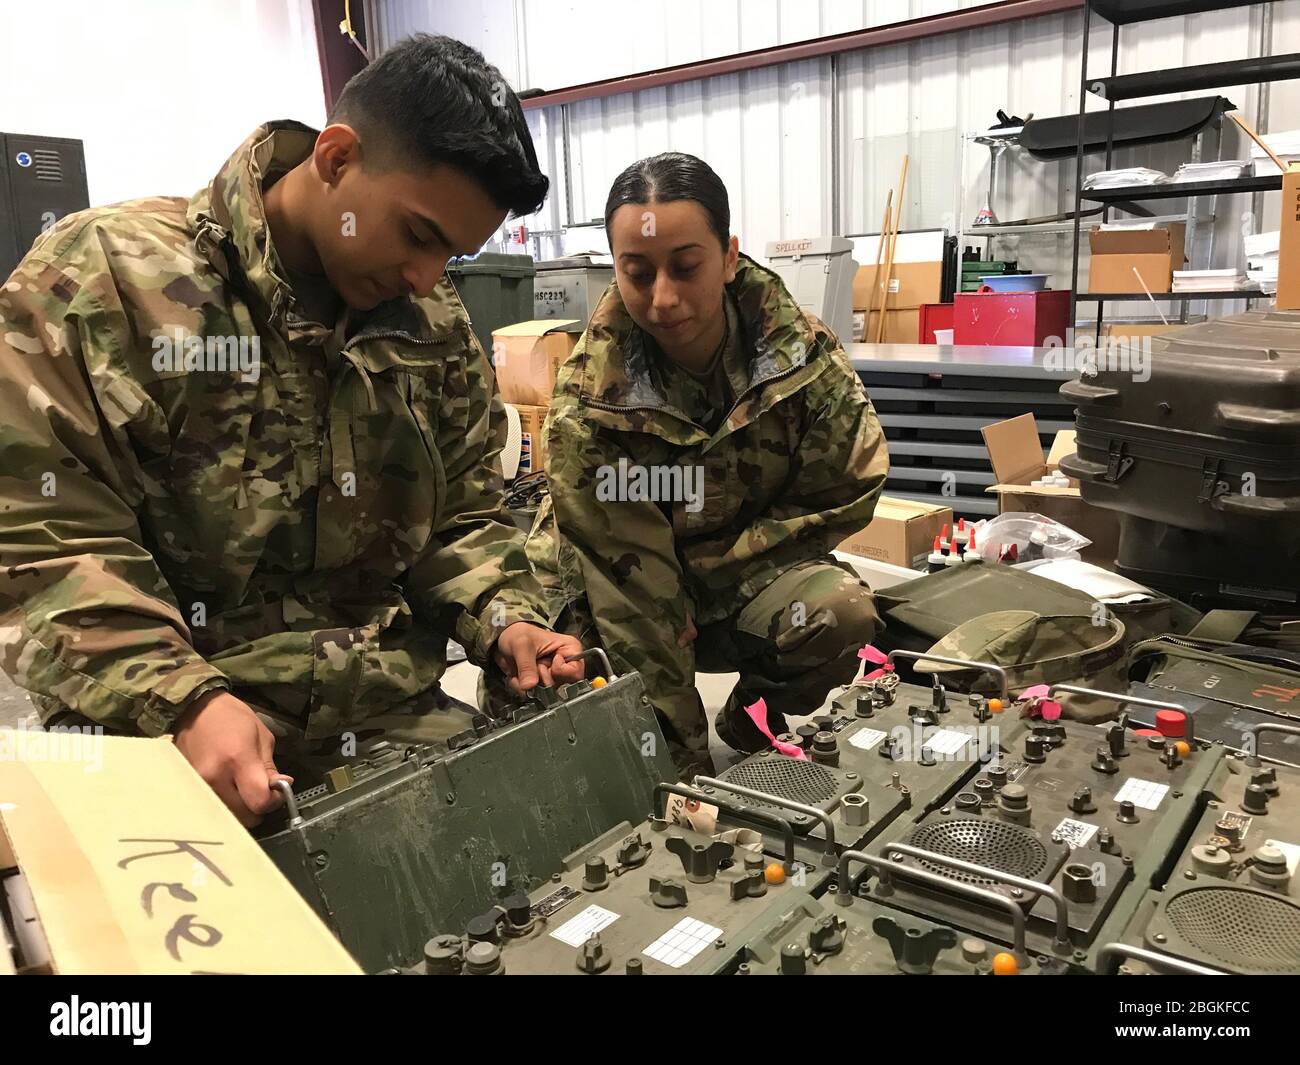 U.S. Army Pfc. Noel Zarazua and Pvt. Citlalit Flores of the California Army National Guard's 115th Regional Support Group check radio equipment at the Roseville Armory March 18, 2020, in Roseville, California. California National Guard units across the state have been activated by Gov. Gavin Newsom to support local and state agencies impacted by the COVID-19 outbreak and subsequent contaiment efforts. Cal Guard units will primarily provide support to medical, logistics and other humanitarian efforts. (Army National Guard photo by Staff Sgt. Eddie Siguenza) Stock Photo